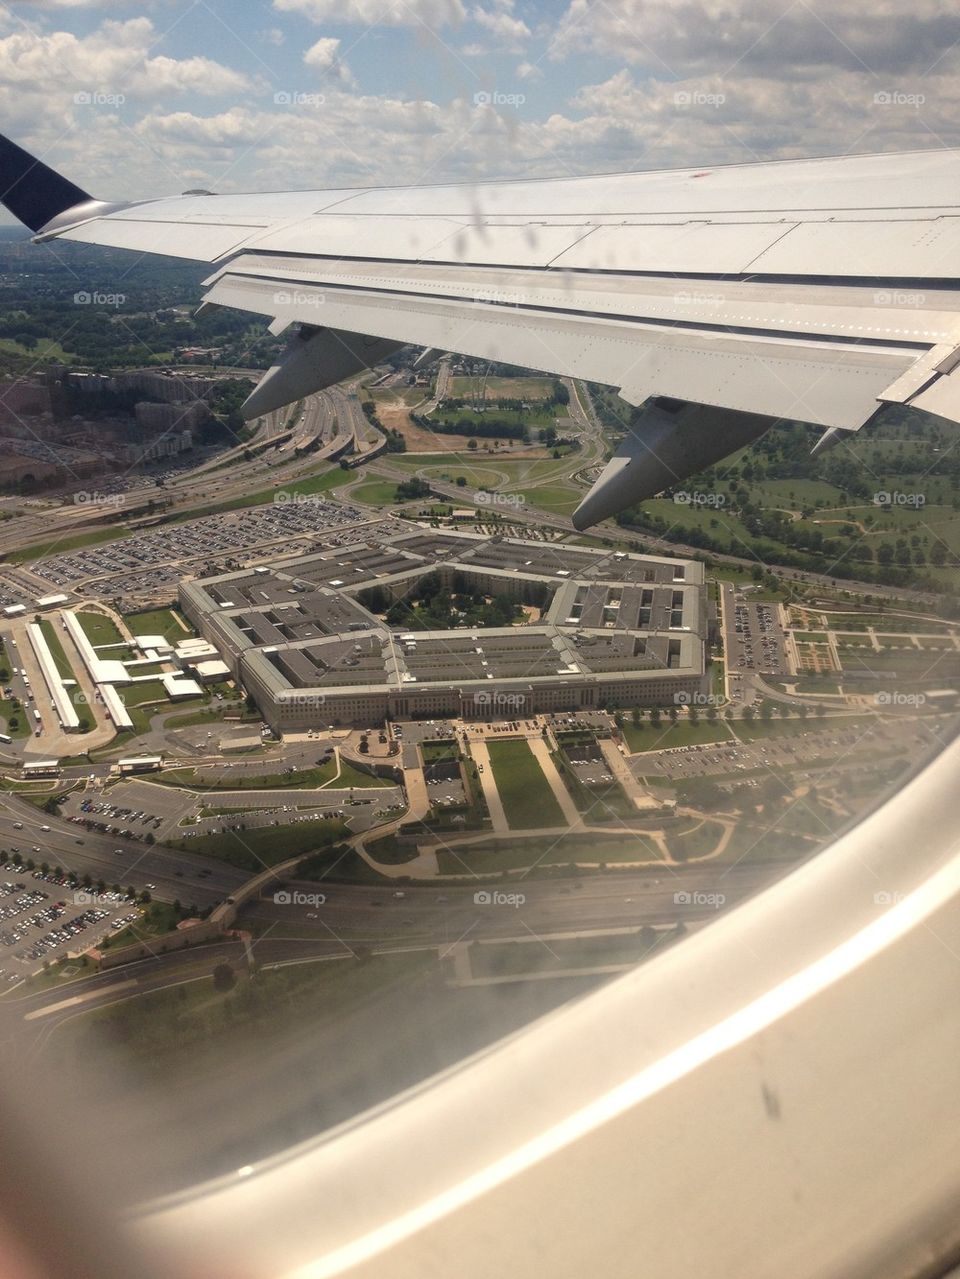 The Pentagon from up above